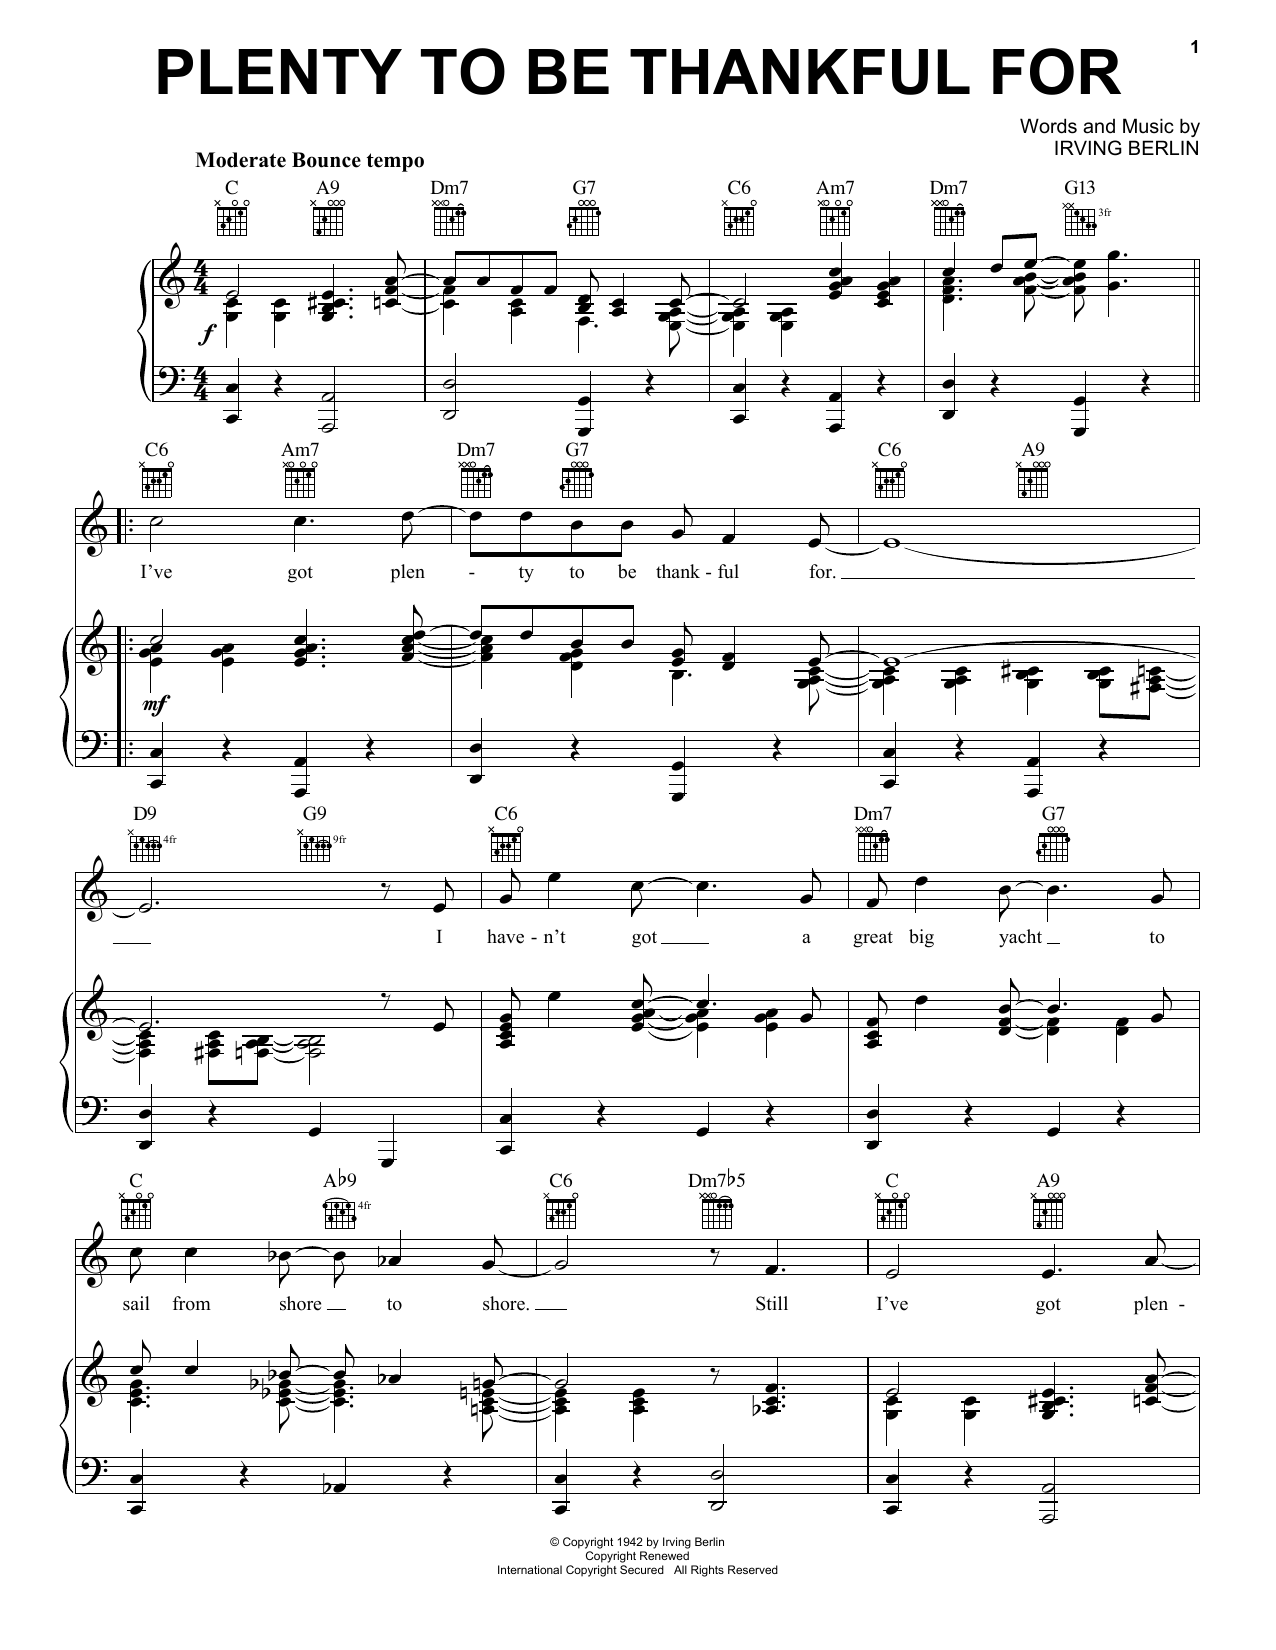 Download Irving Berlin Plenty To Be Thankful For Sheet Music